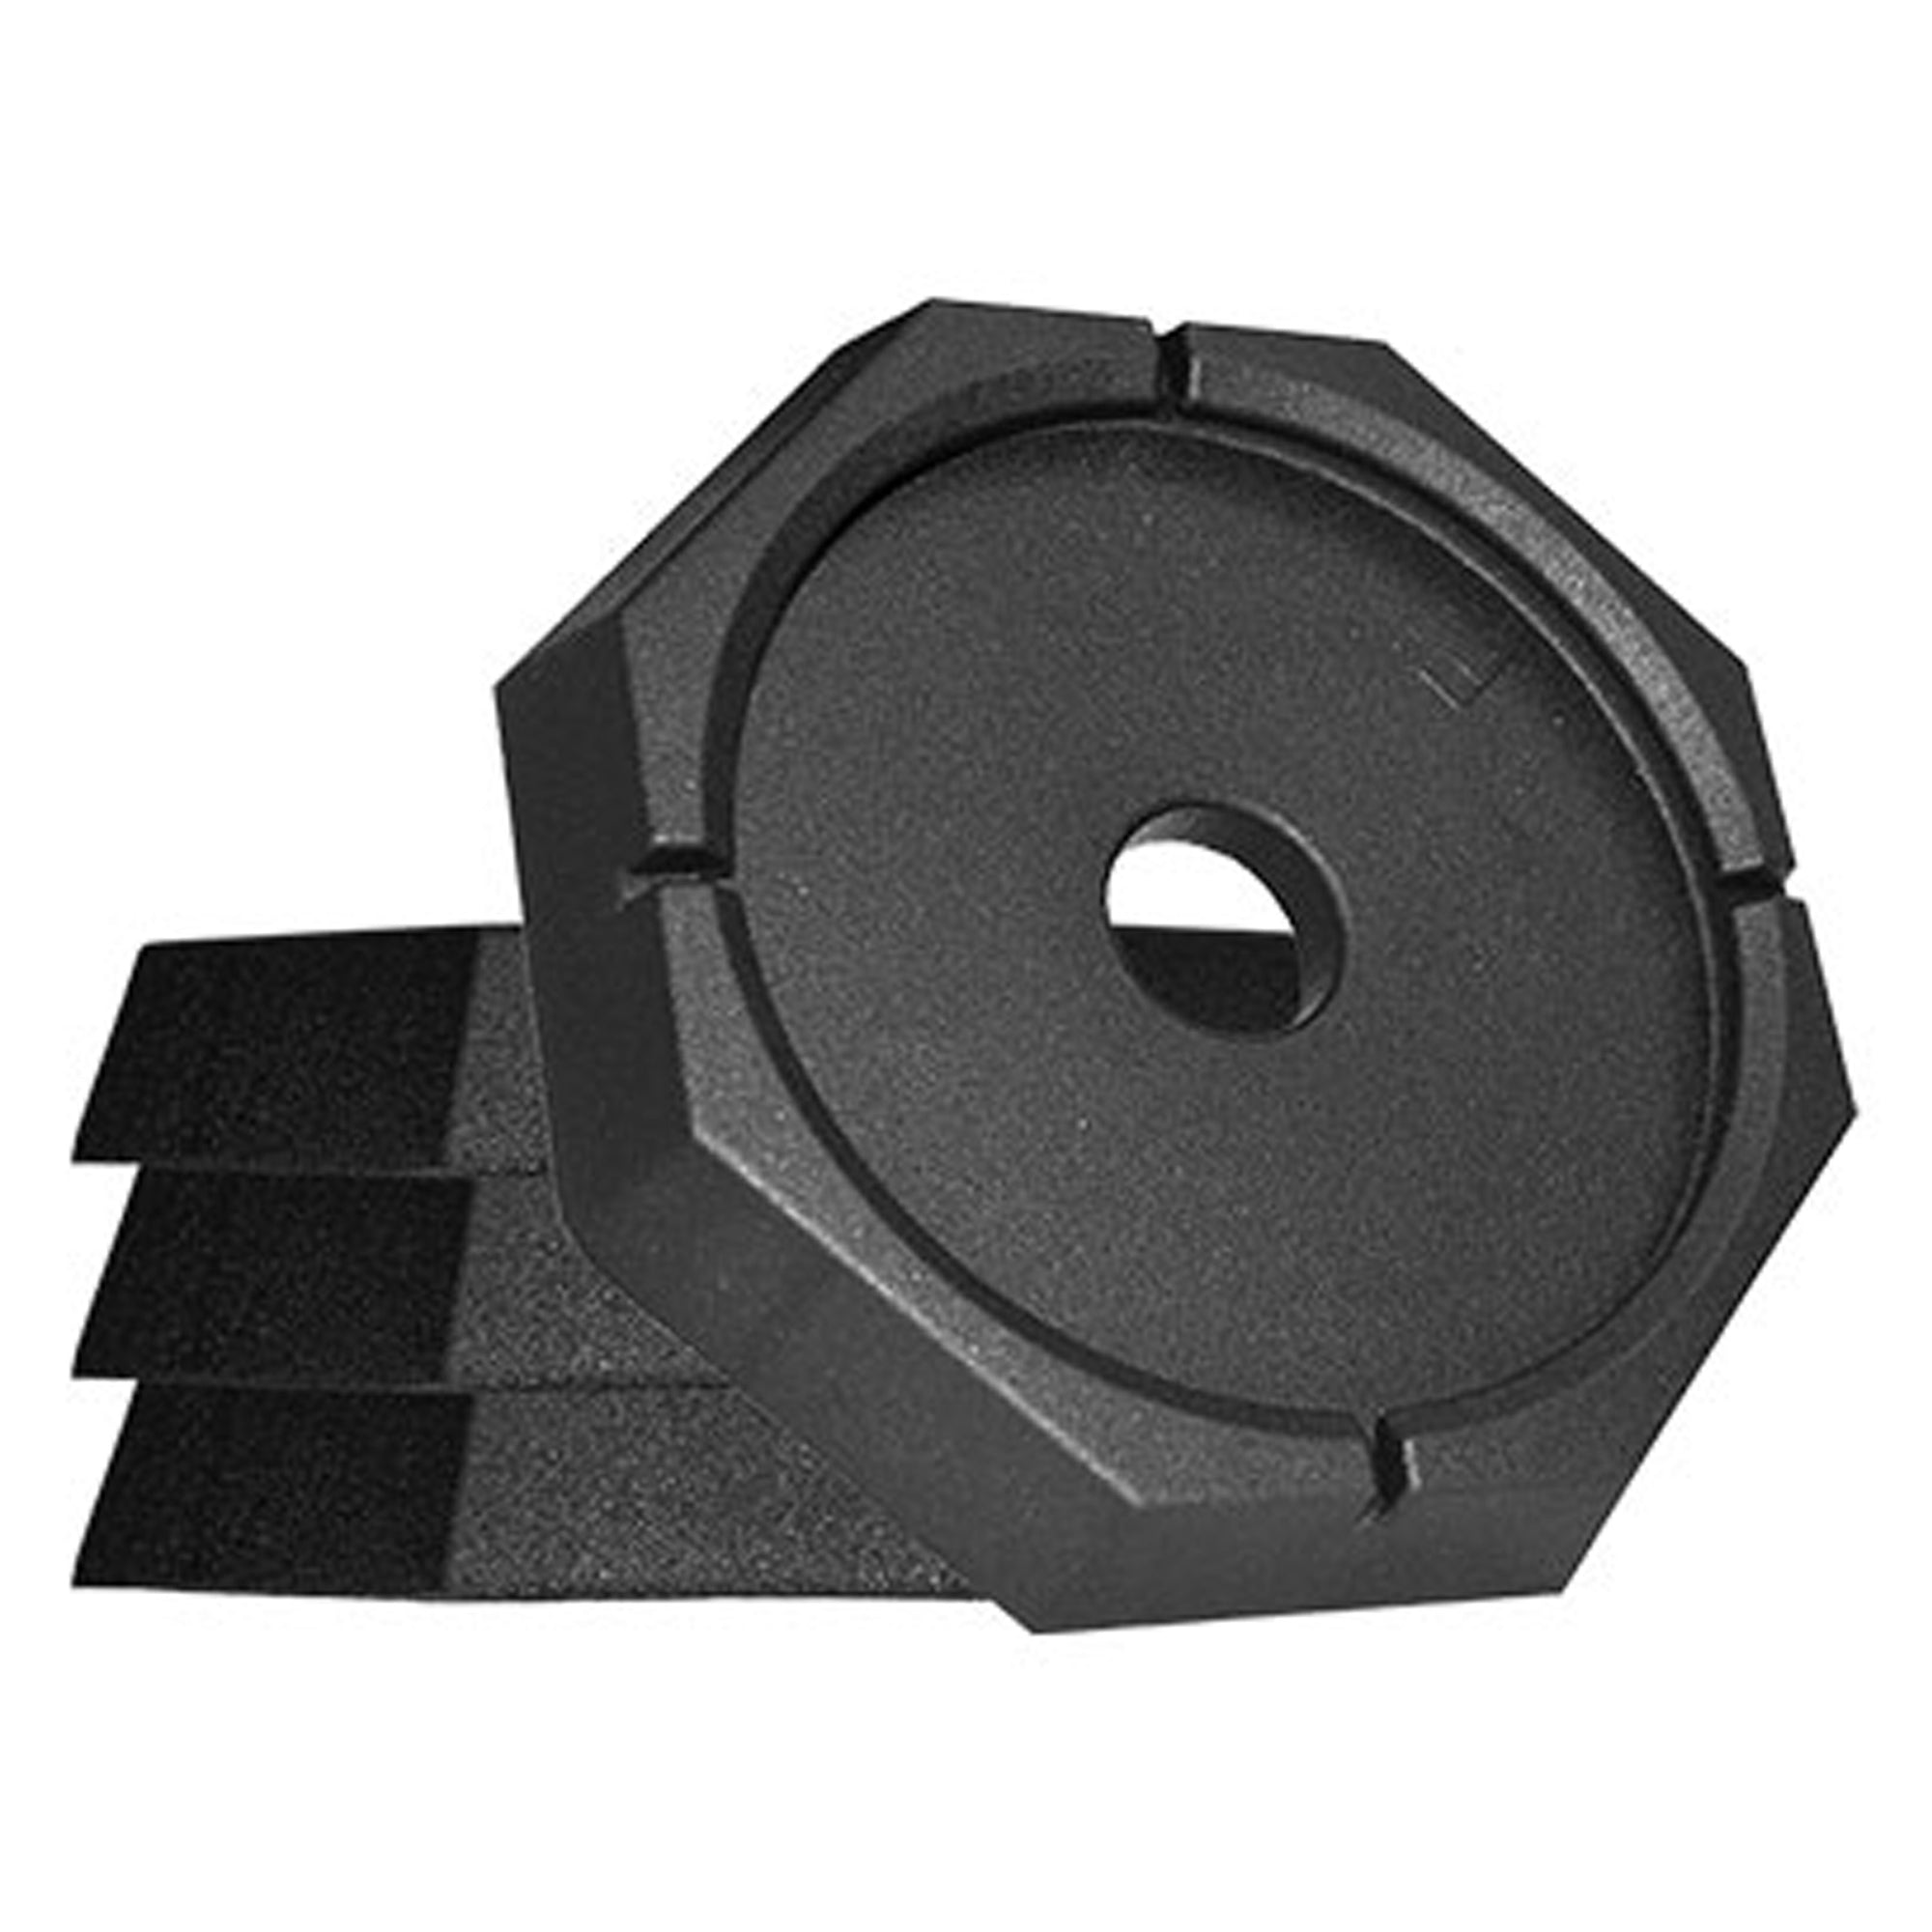 SnapPad EQ12SP4 EQ Grand for Equalizer 12" Round Jack Feet - 4-Pack